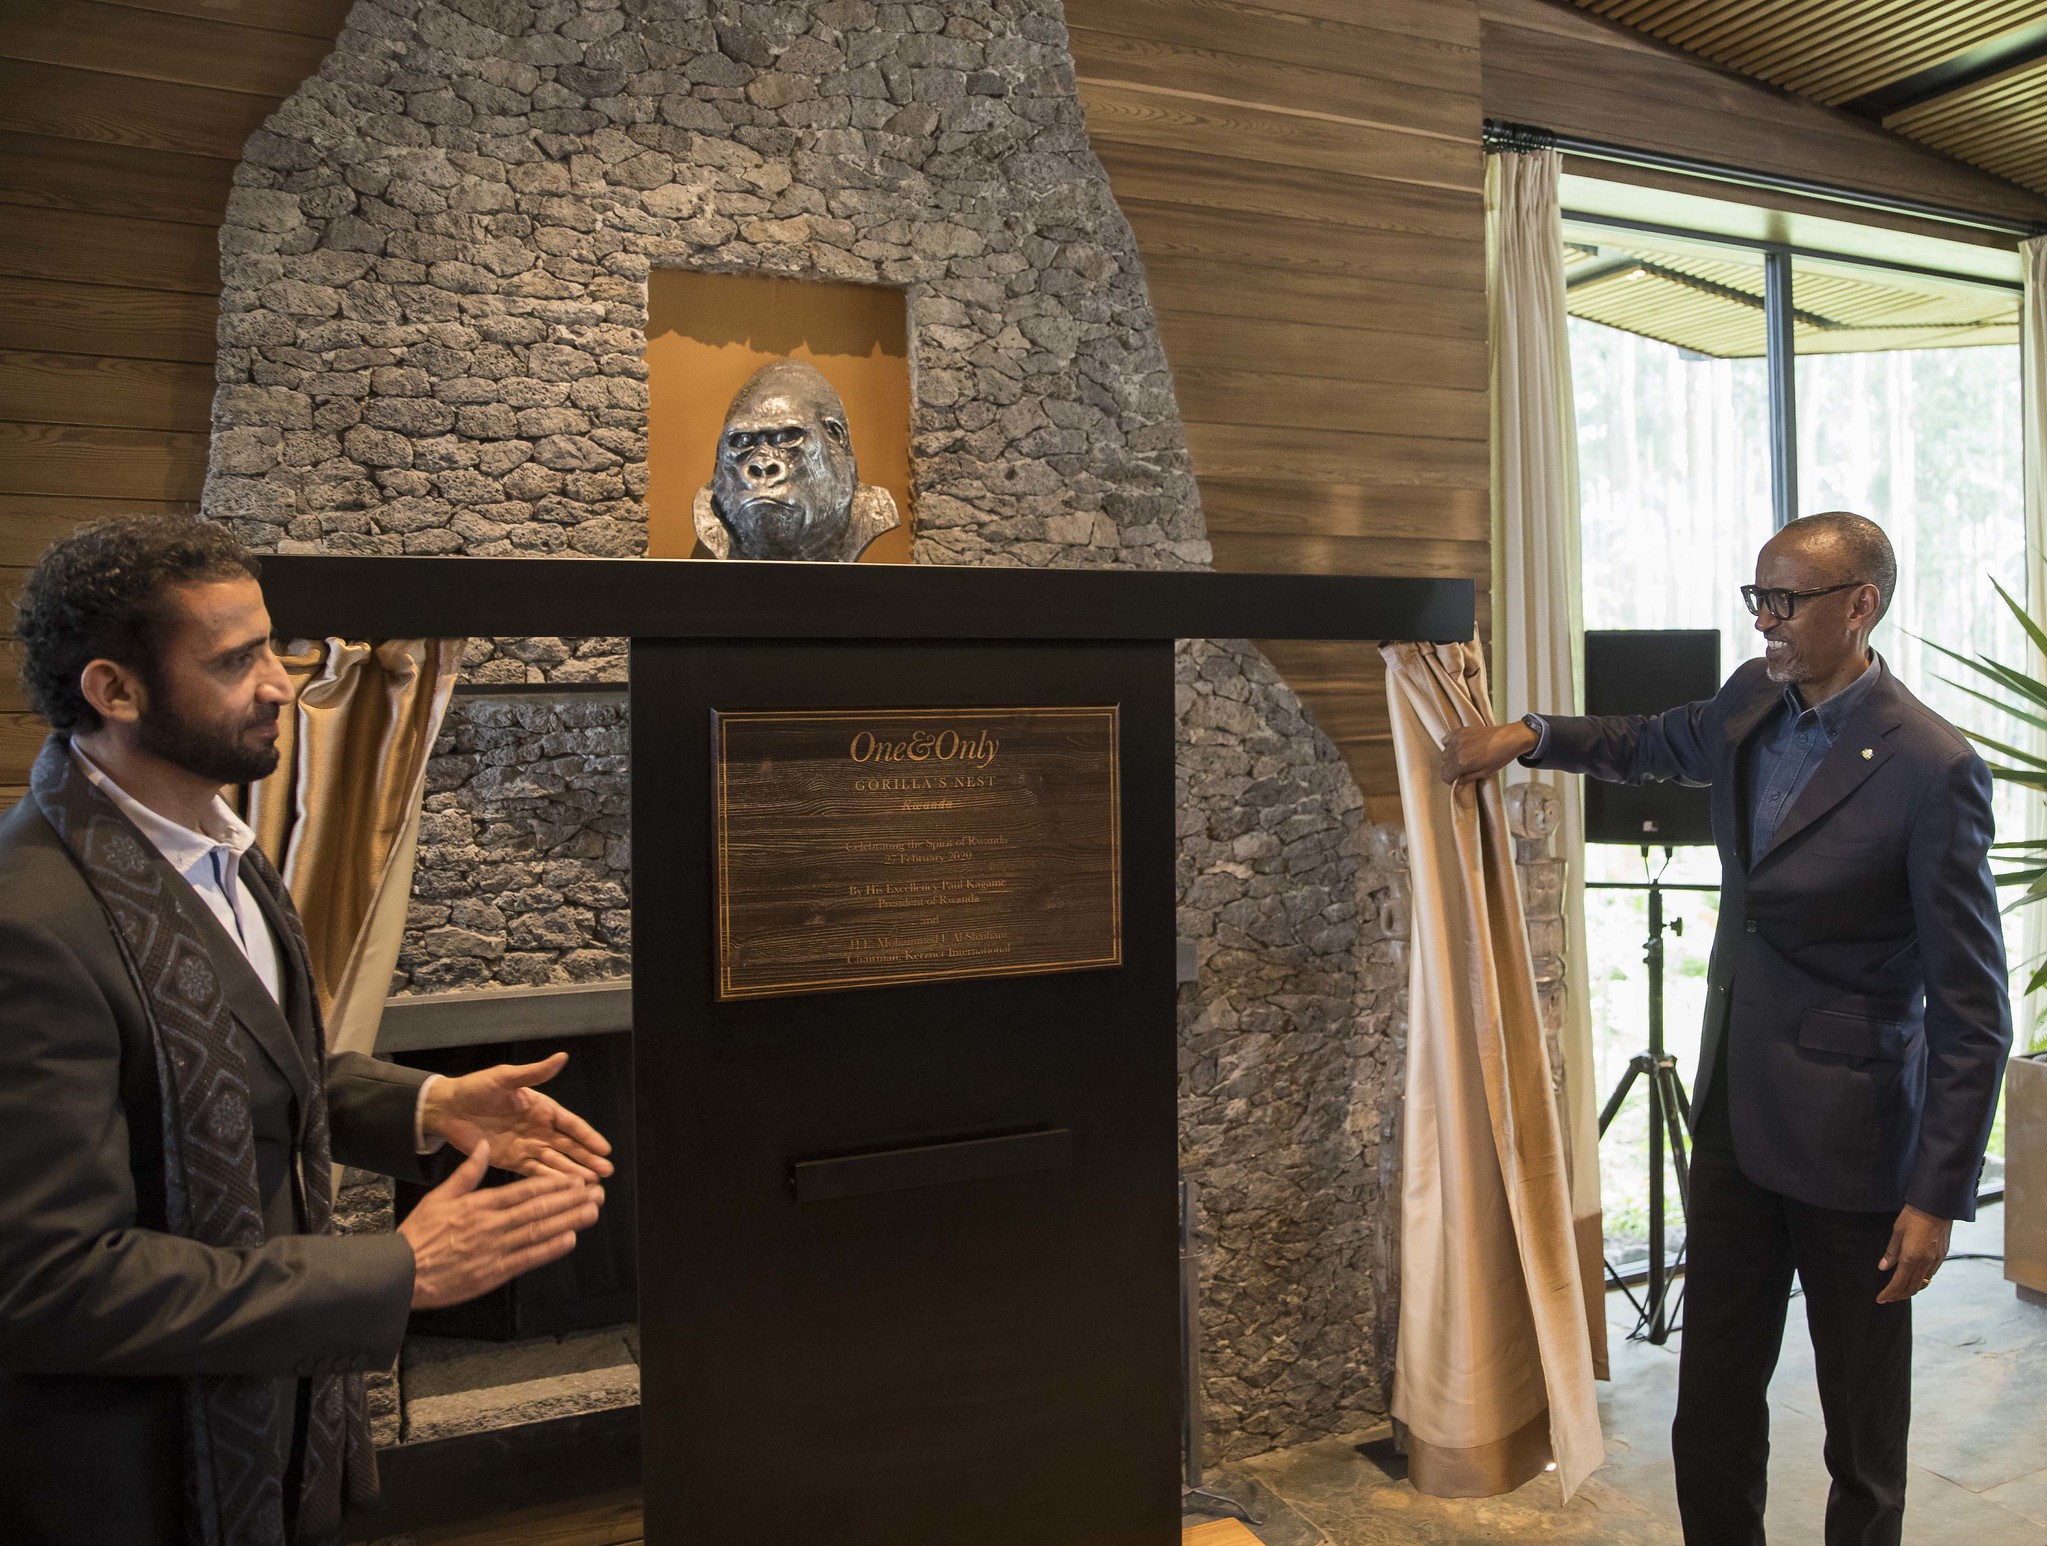 President Paul Kagame was joined by First Lady Jeannette Kagame, Chair of Kerzner International, Mohammed Al Shaibani and the Board among other dignitaries to launch One & Only Gorillaâ€™s Nest, a multi-luxurious lodge located in Kinigi. / Photos: Village Urugwiro